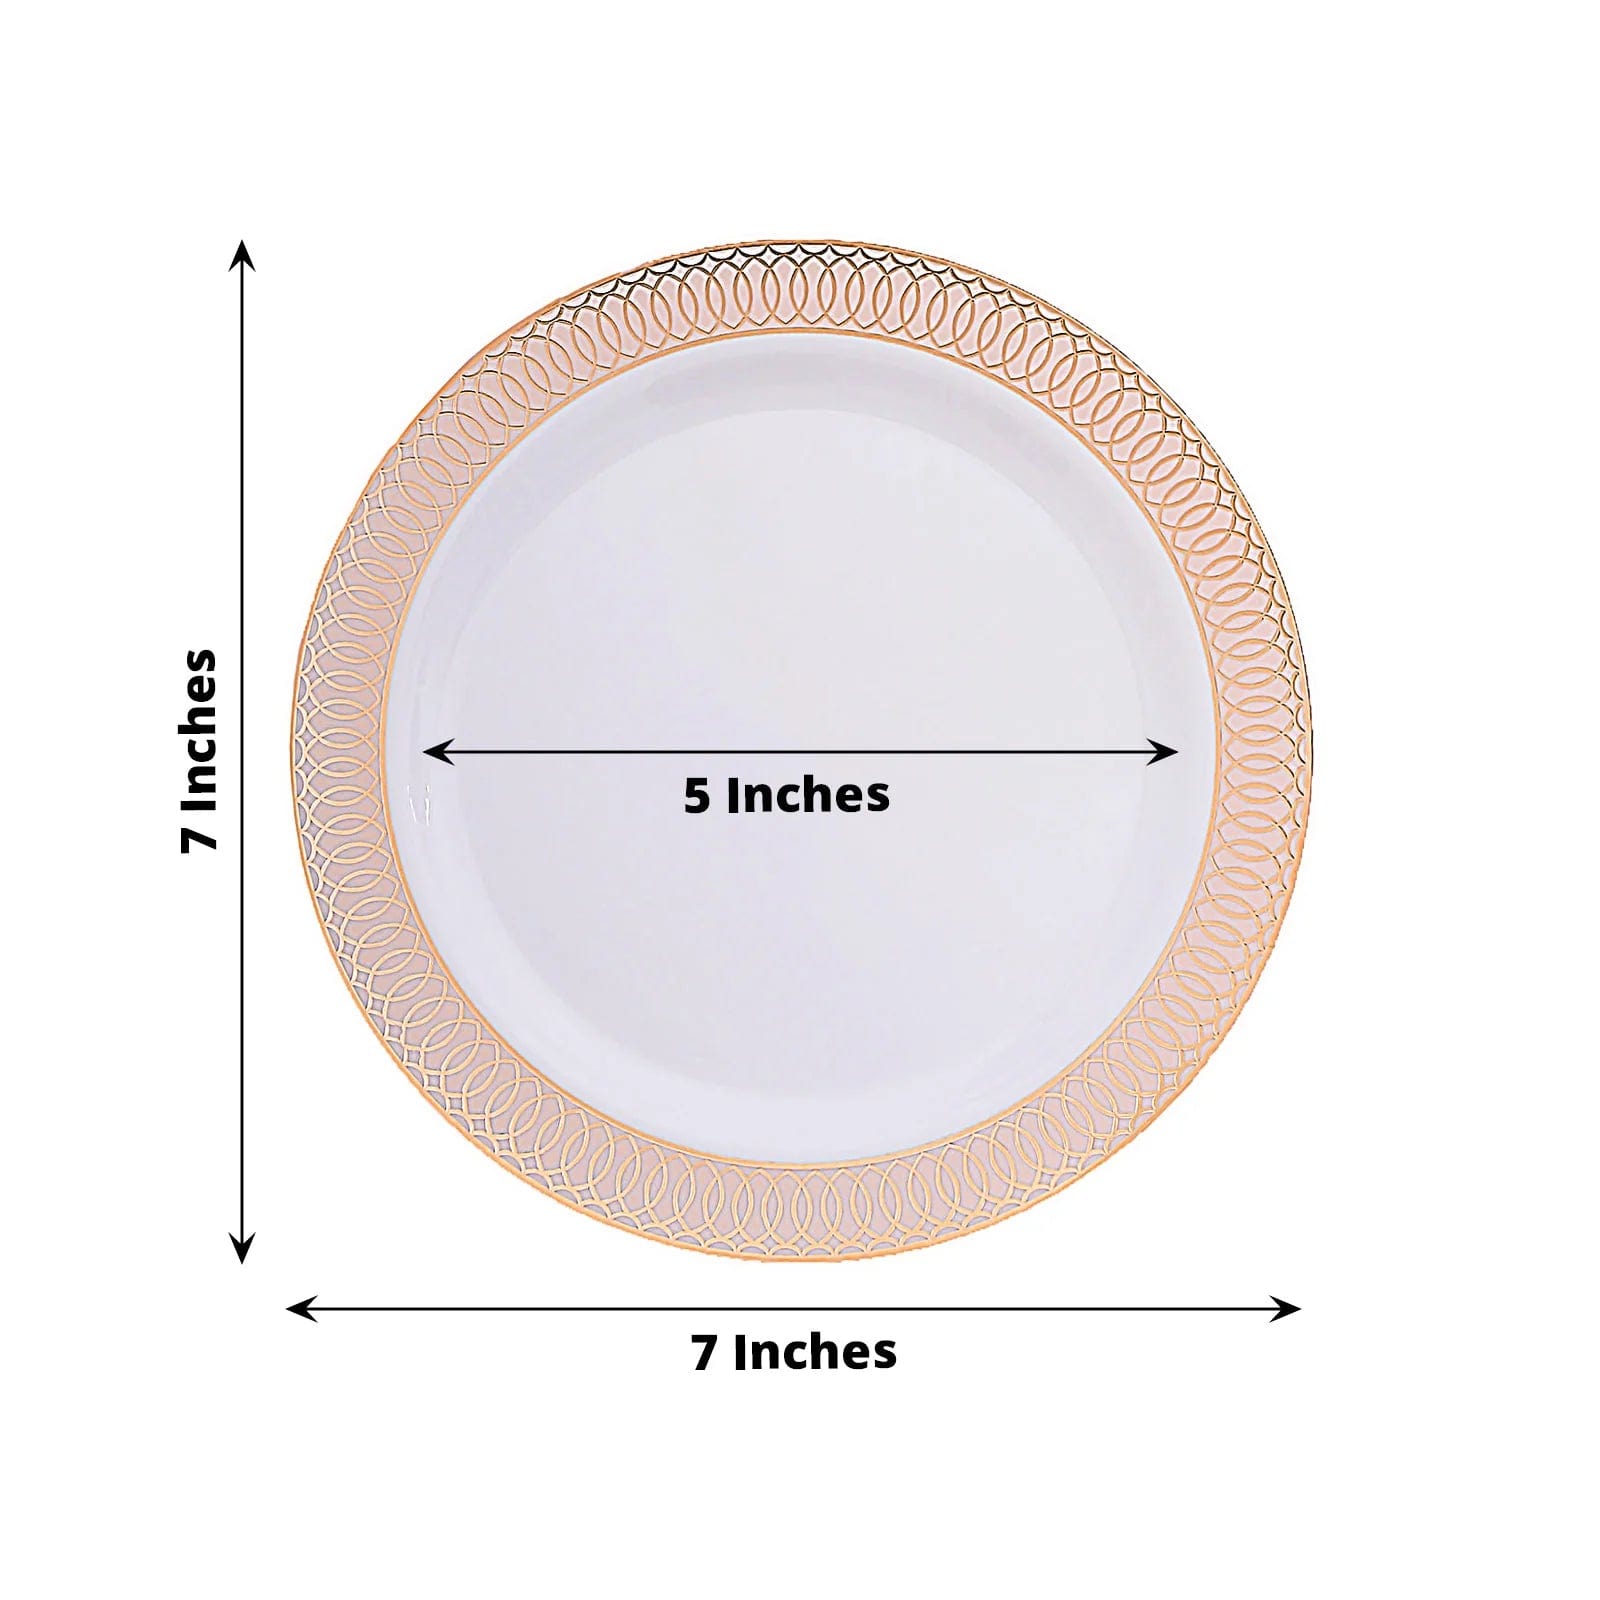 10 Round Disposable Salad and Dinner Plastic Plates with Spiral Trim